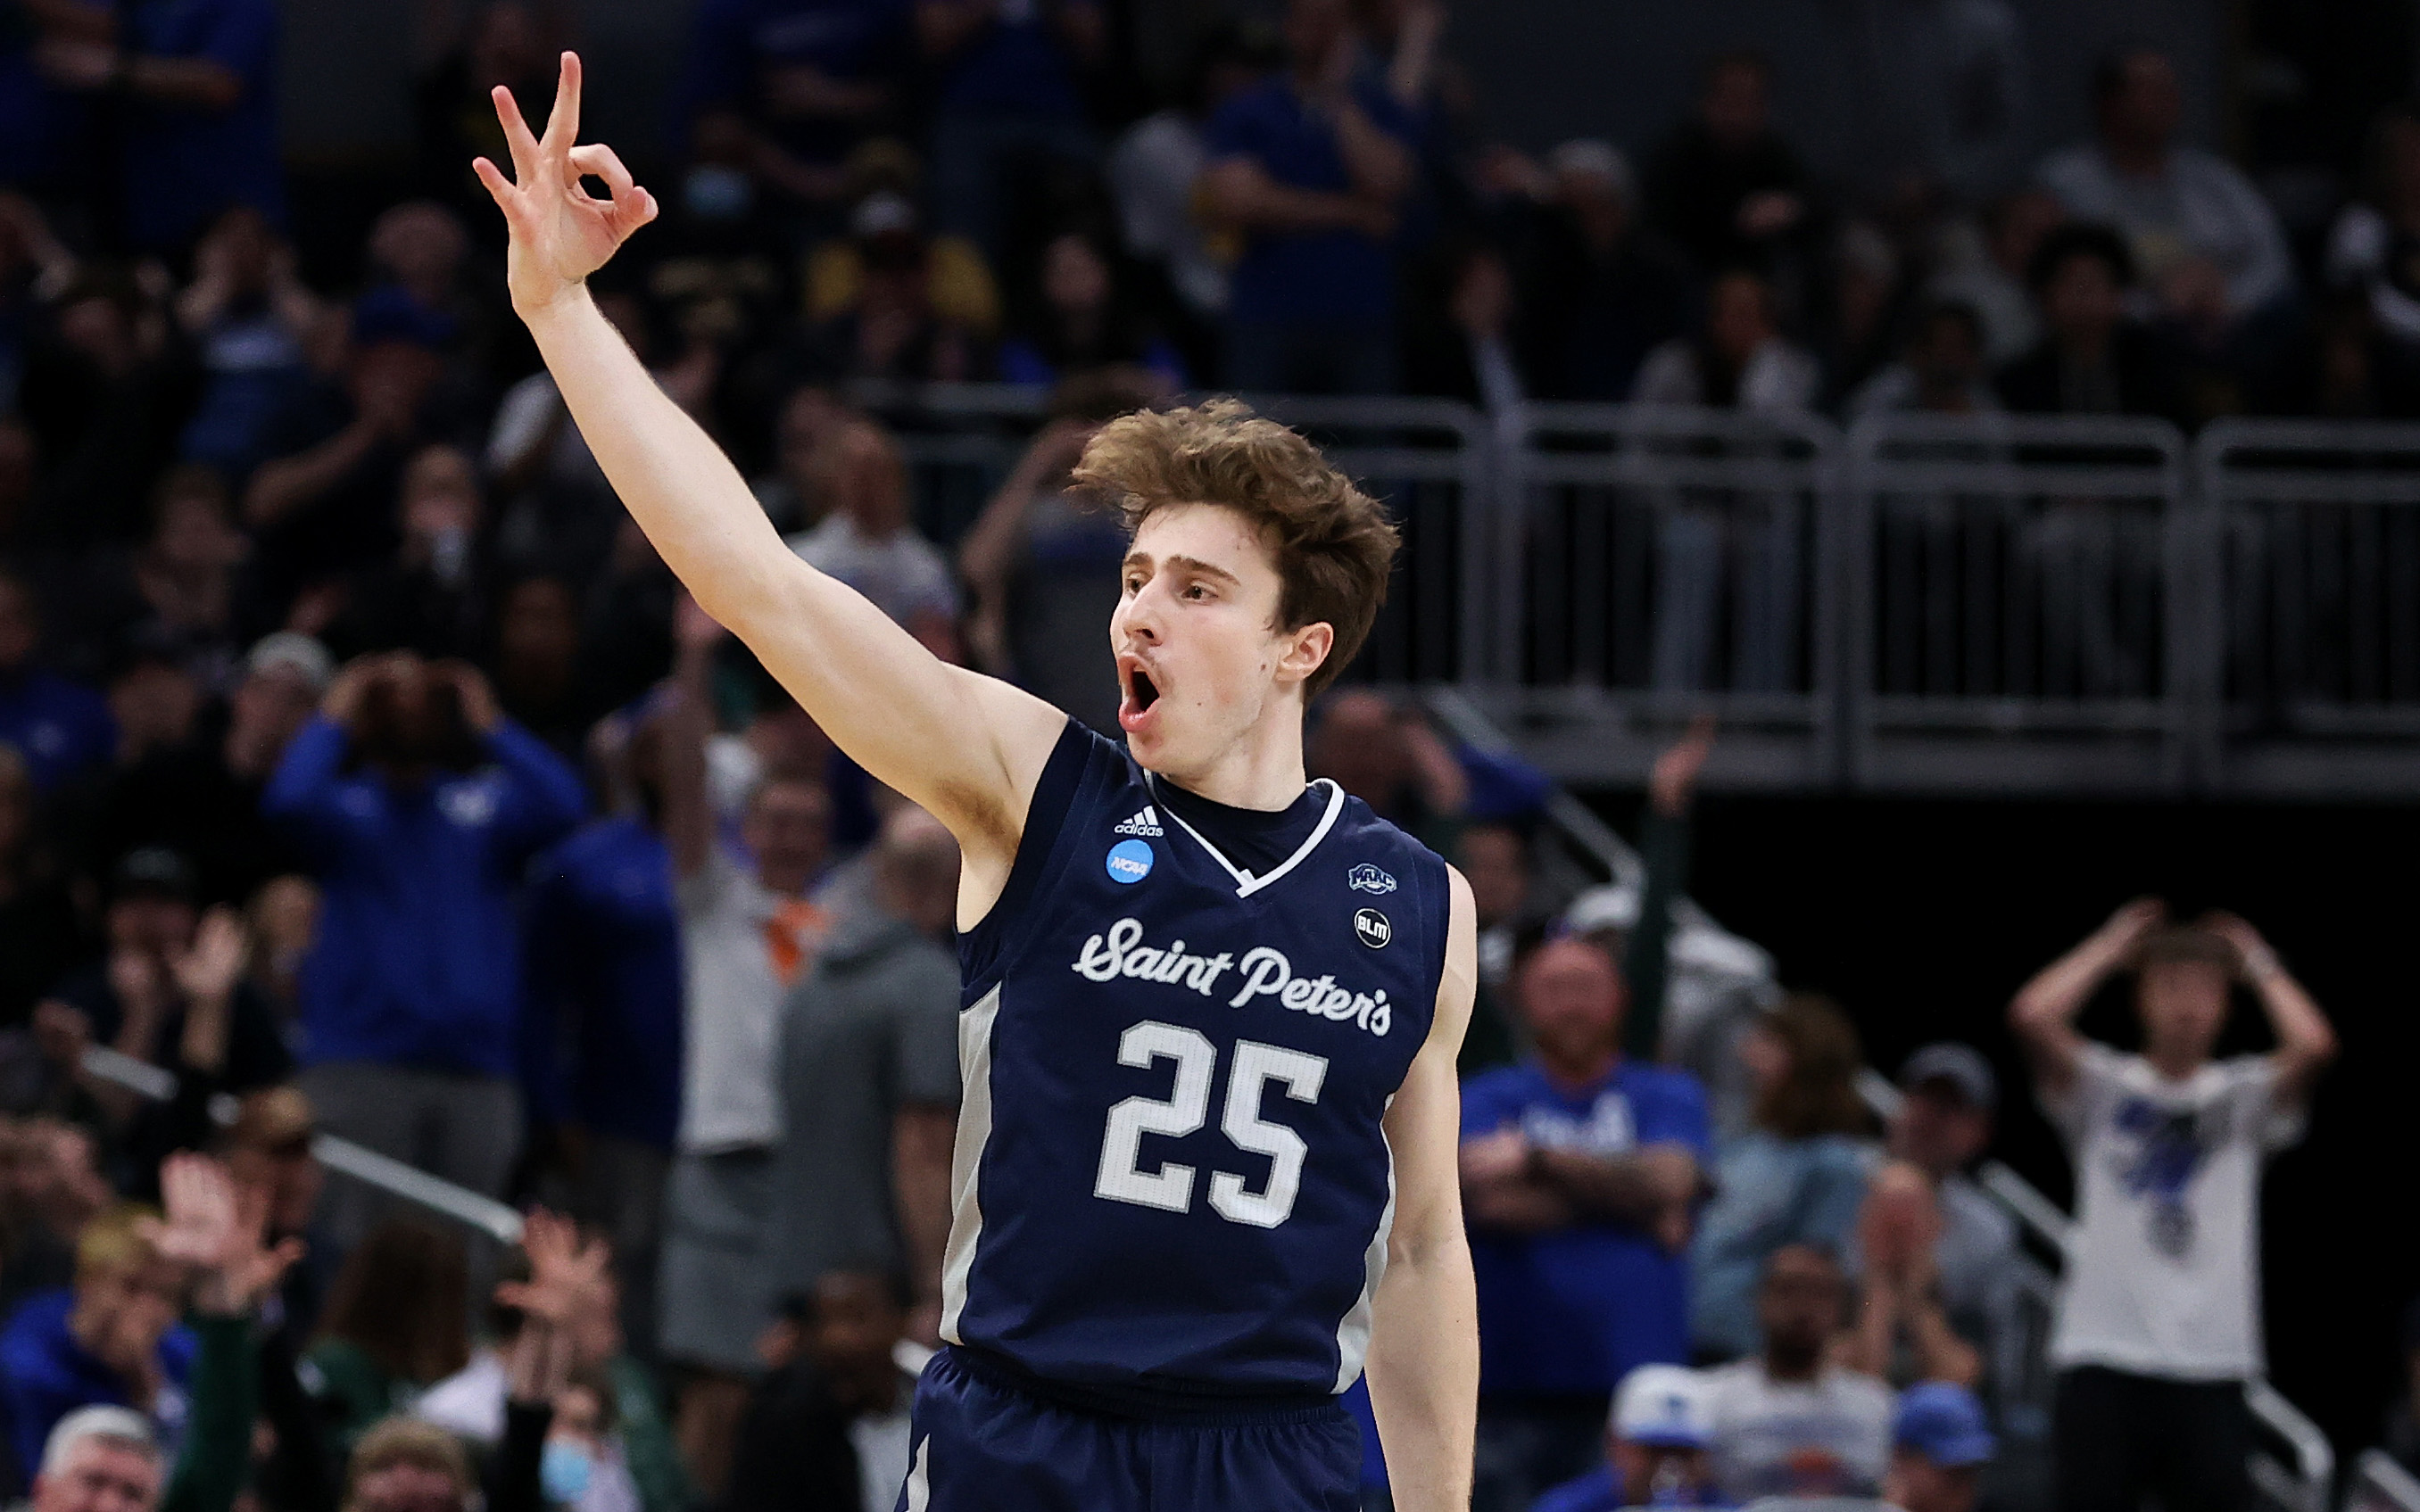 Saint Peter's over Kentucky was one of the most astounding financial upsets in March Madness history | This is the Loop | GolfDigest.com